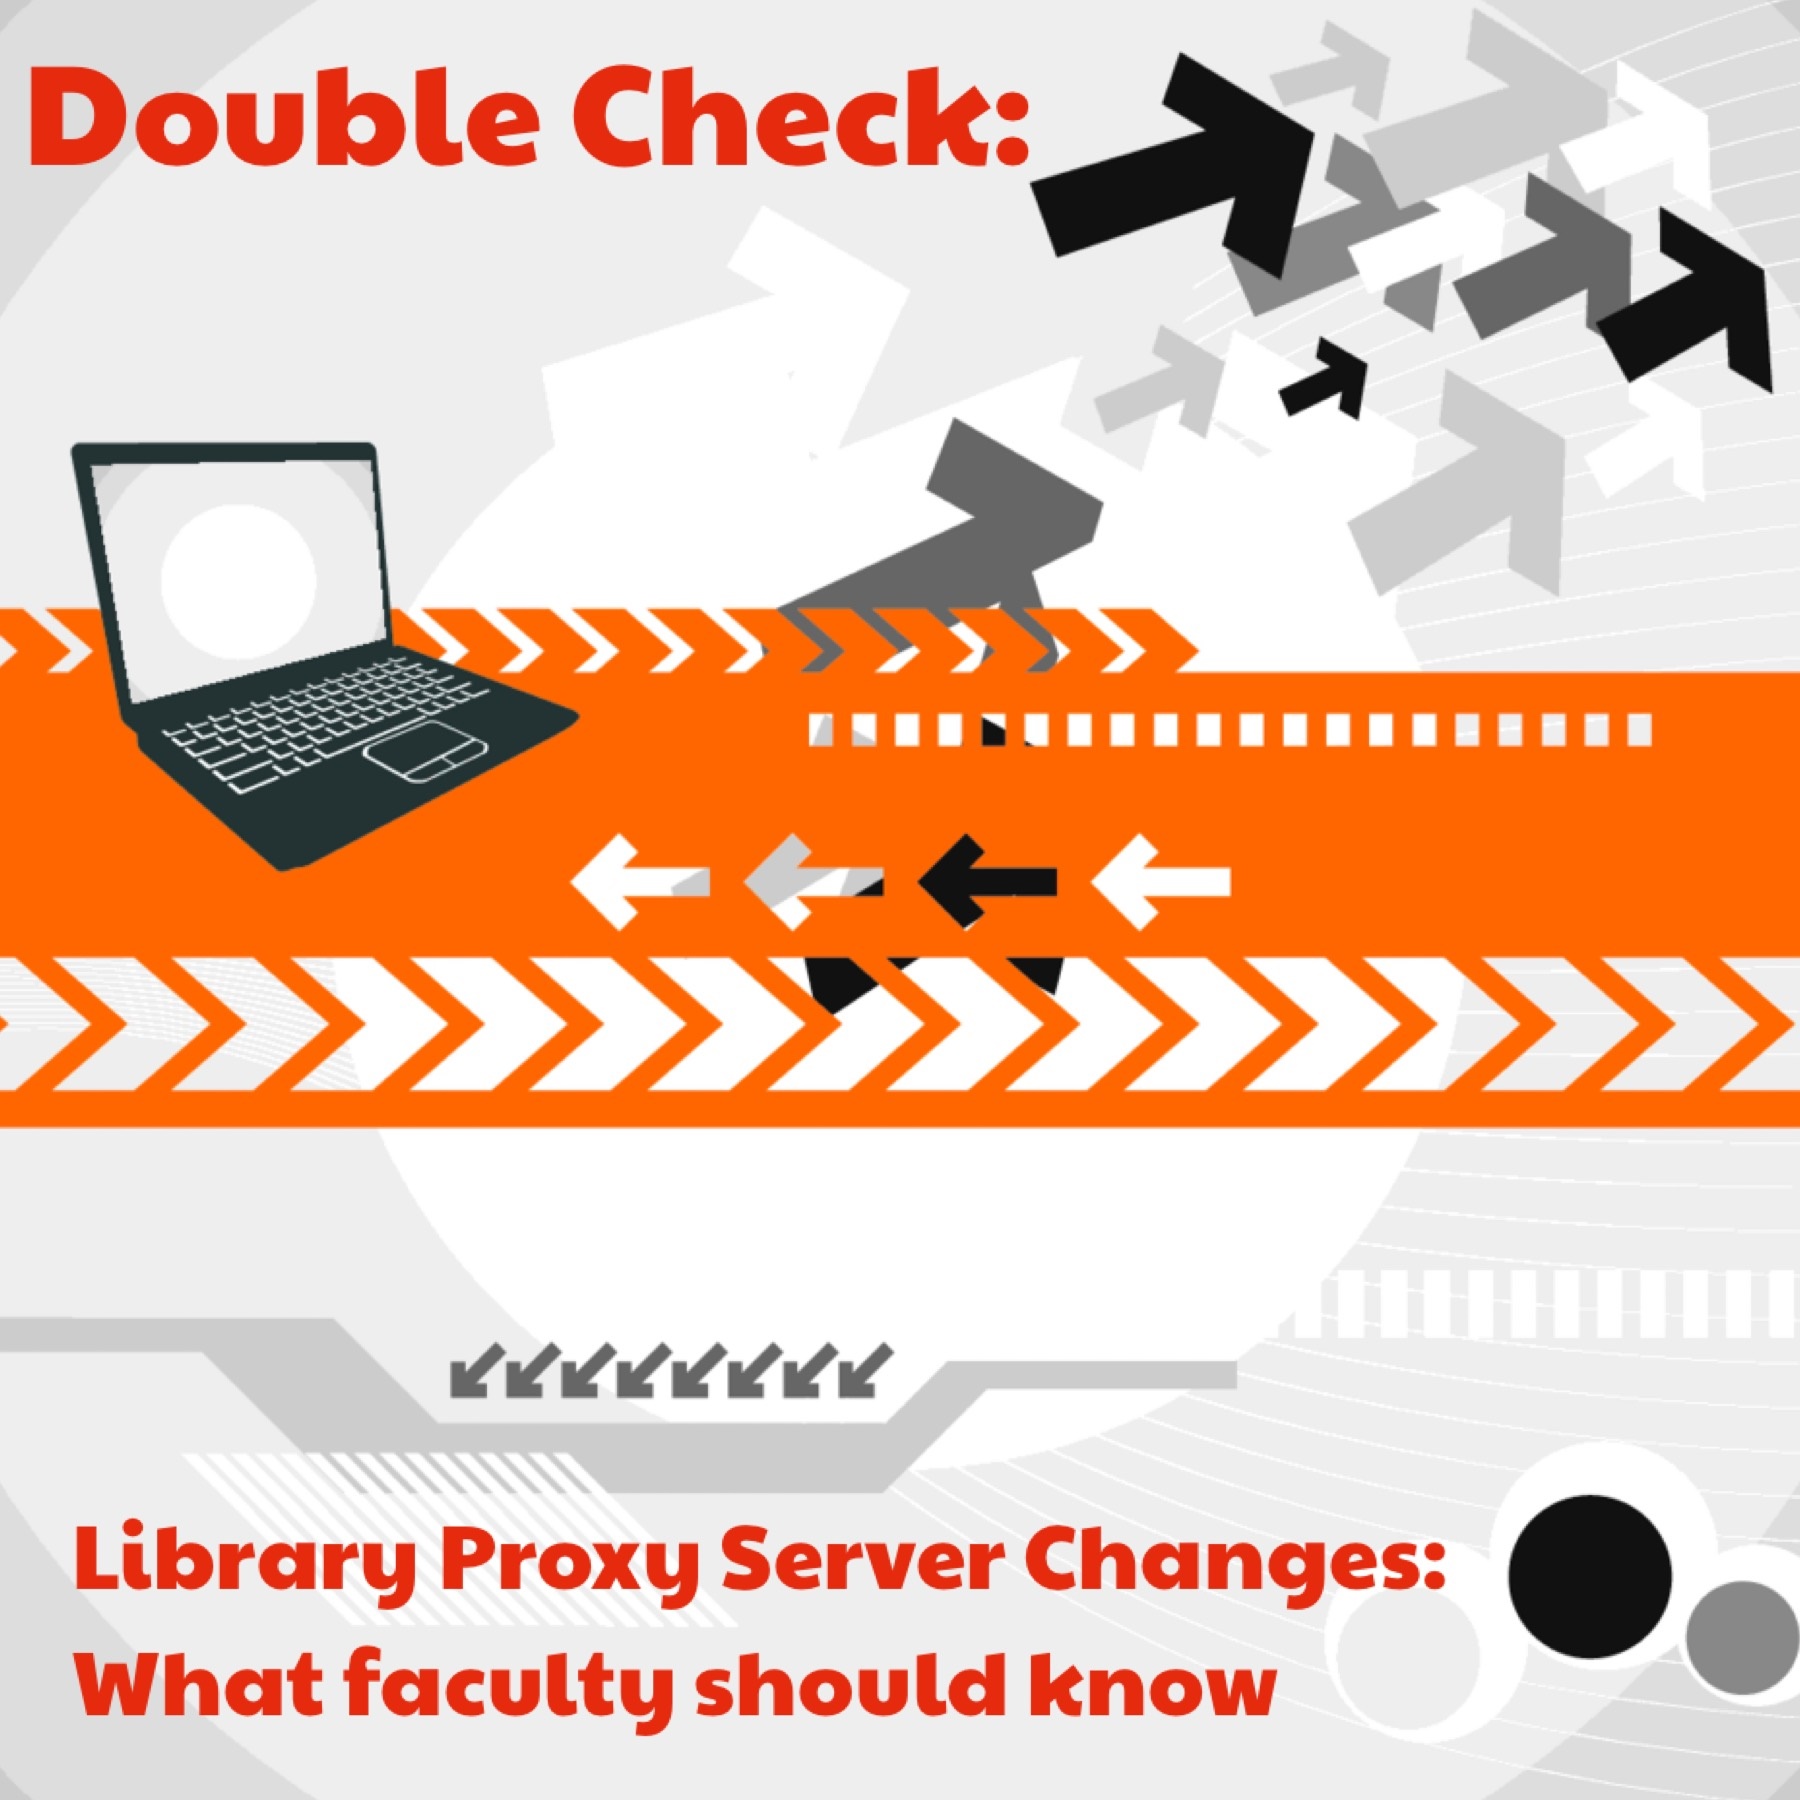 Library Proxy Server Changes: What faculty should know to double check in Brightspace 